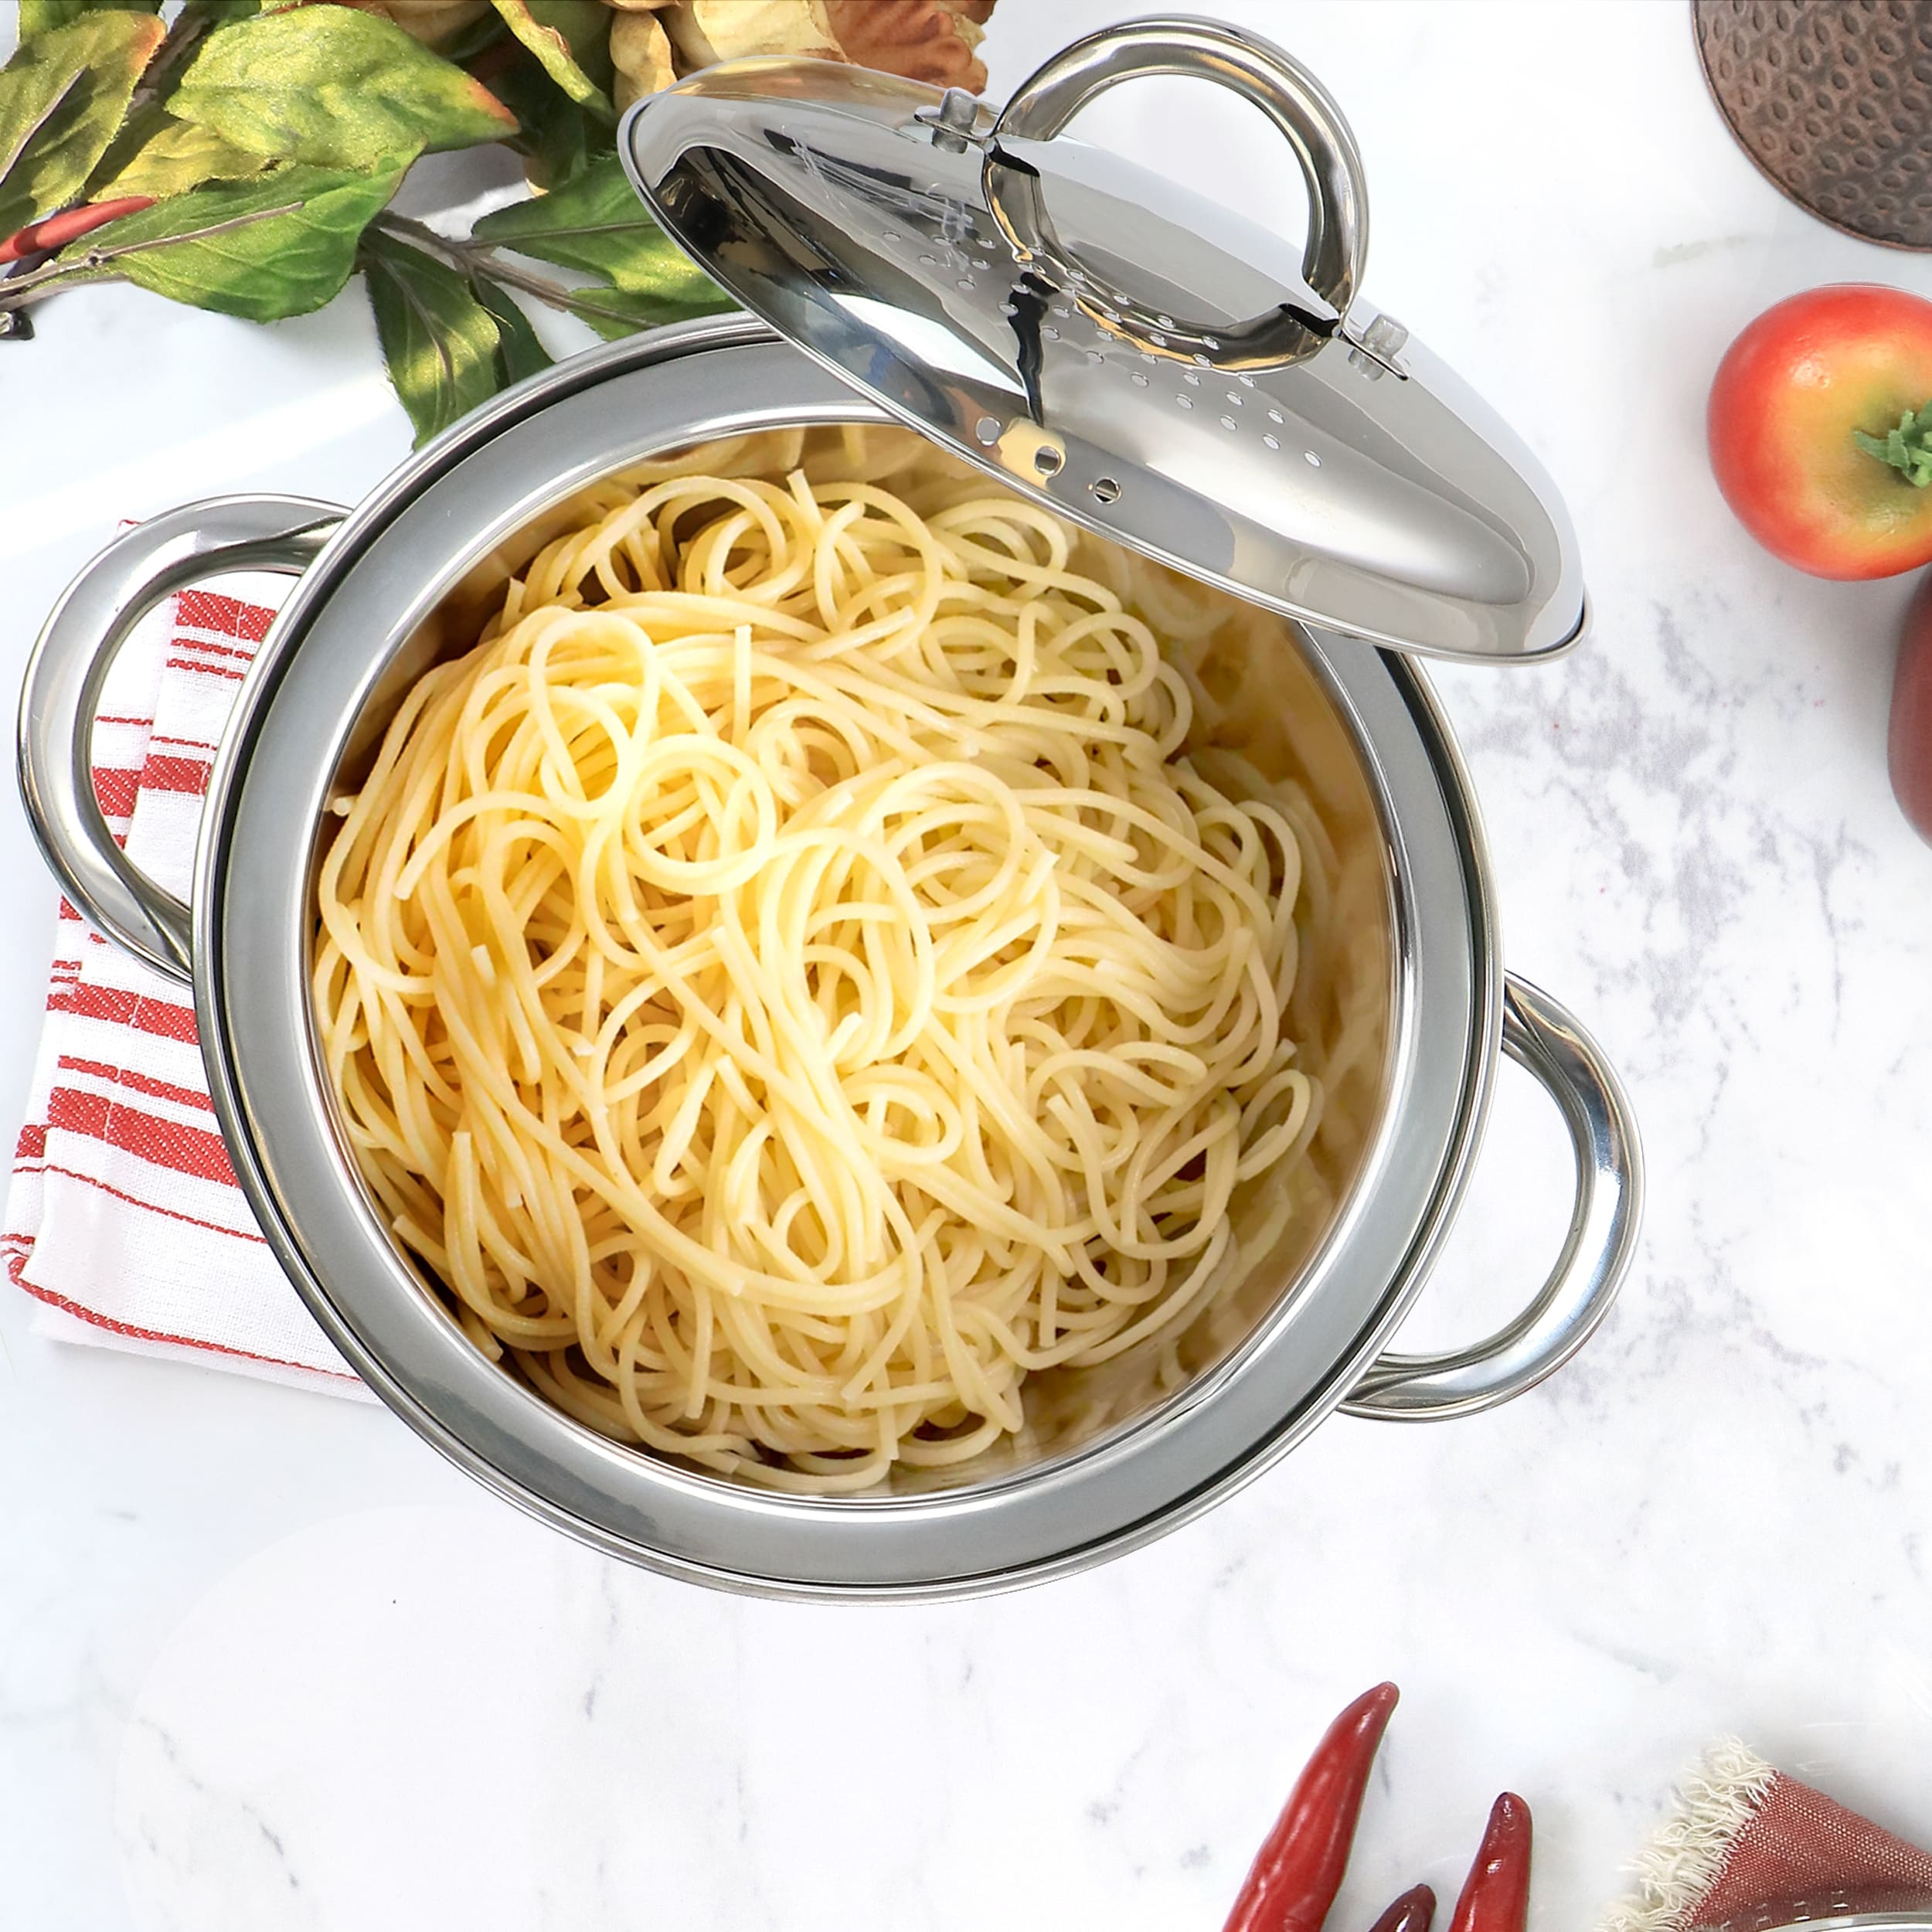 https://ak1.ostkcdn.com/images/products/is/images/direct/03c91cc4bd7b5ecf21e1f2da89b45c830497a882/Oster-Sangerfield-5Qt-Pasta-Pot-with-Strainer-Lid-and-Steamer.jpg